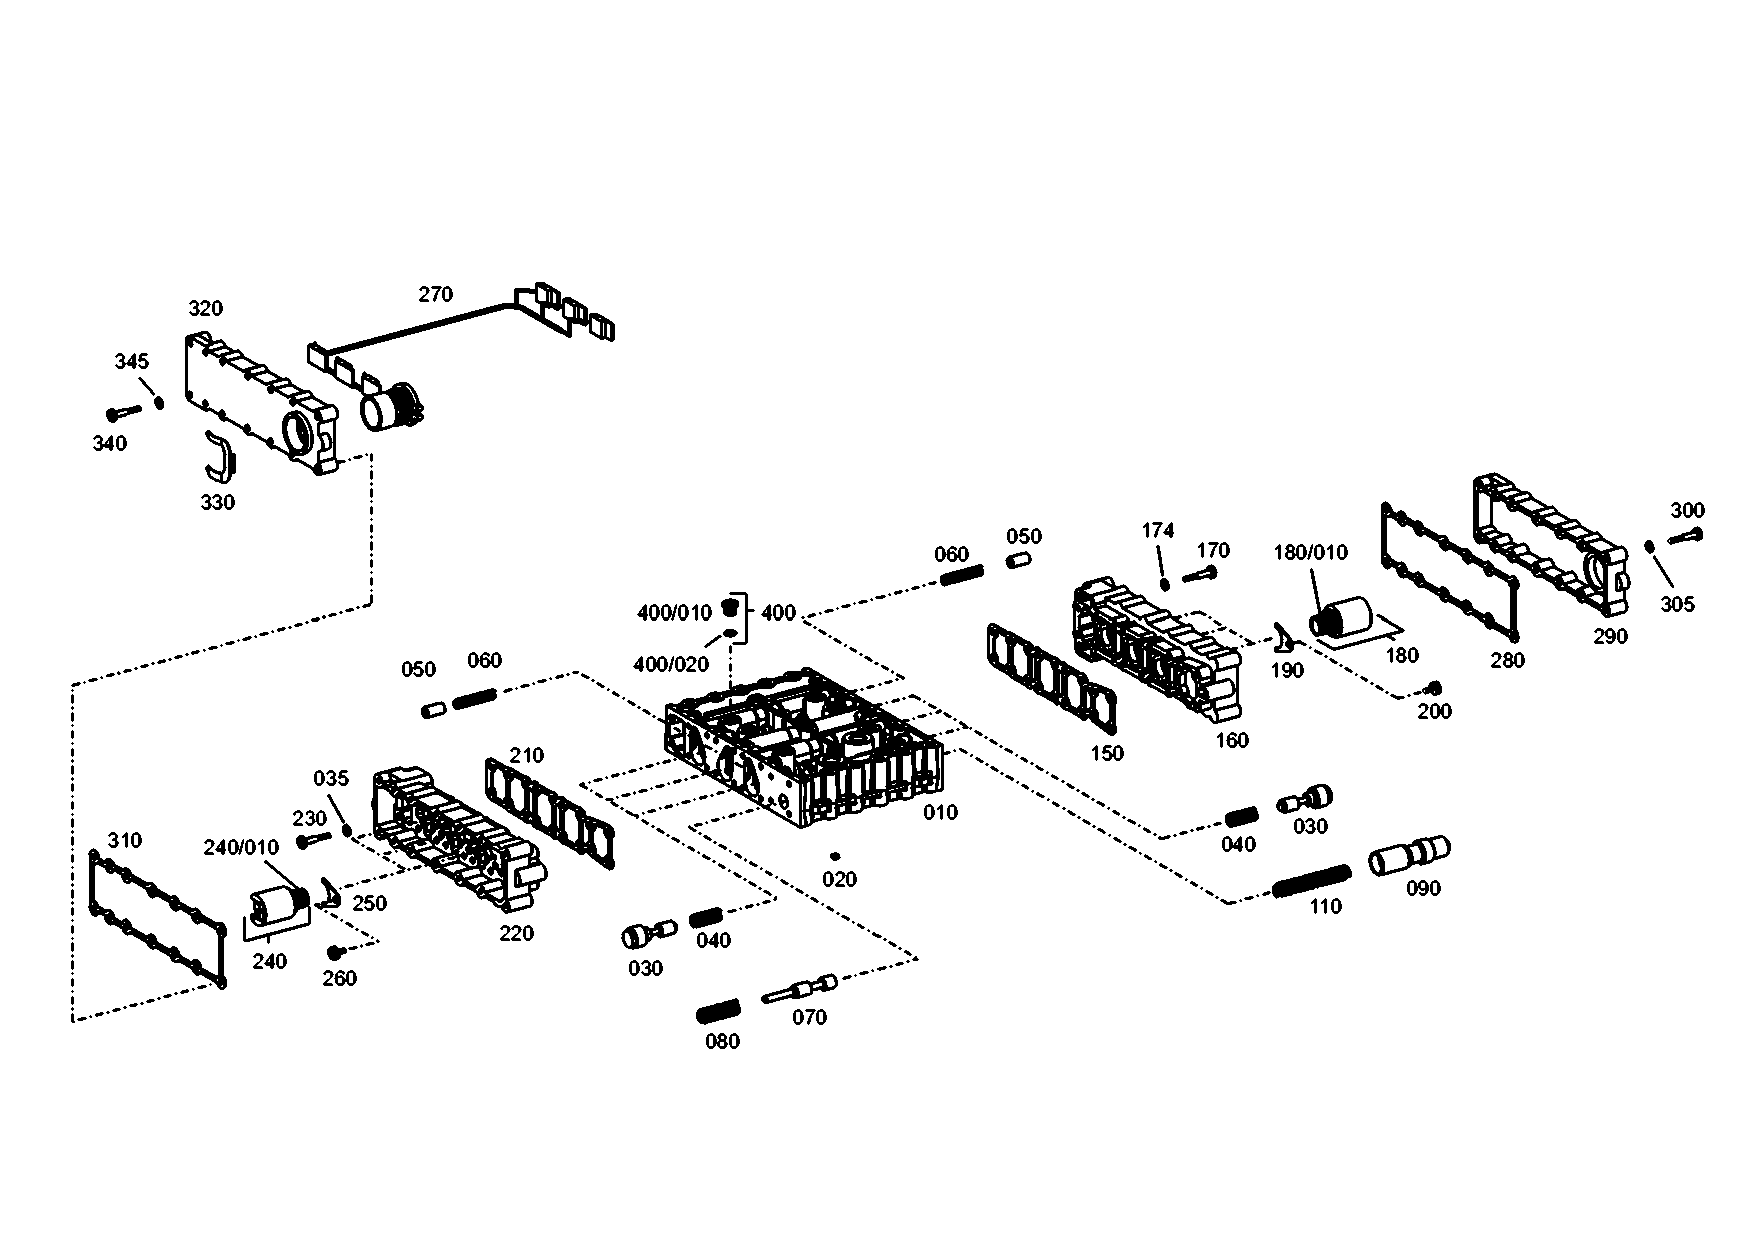 drawing for NOELL GMBH 000,630,2215 - WIRING HARNESS (figure 1)